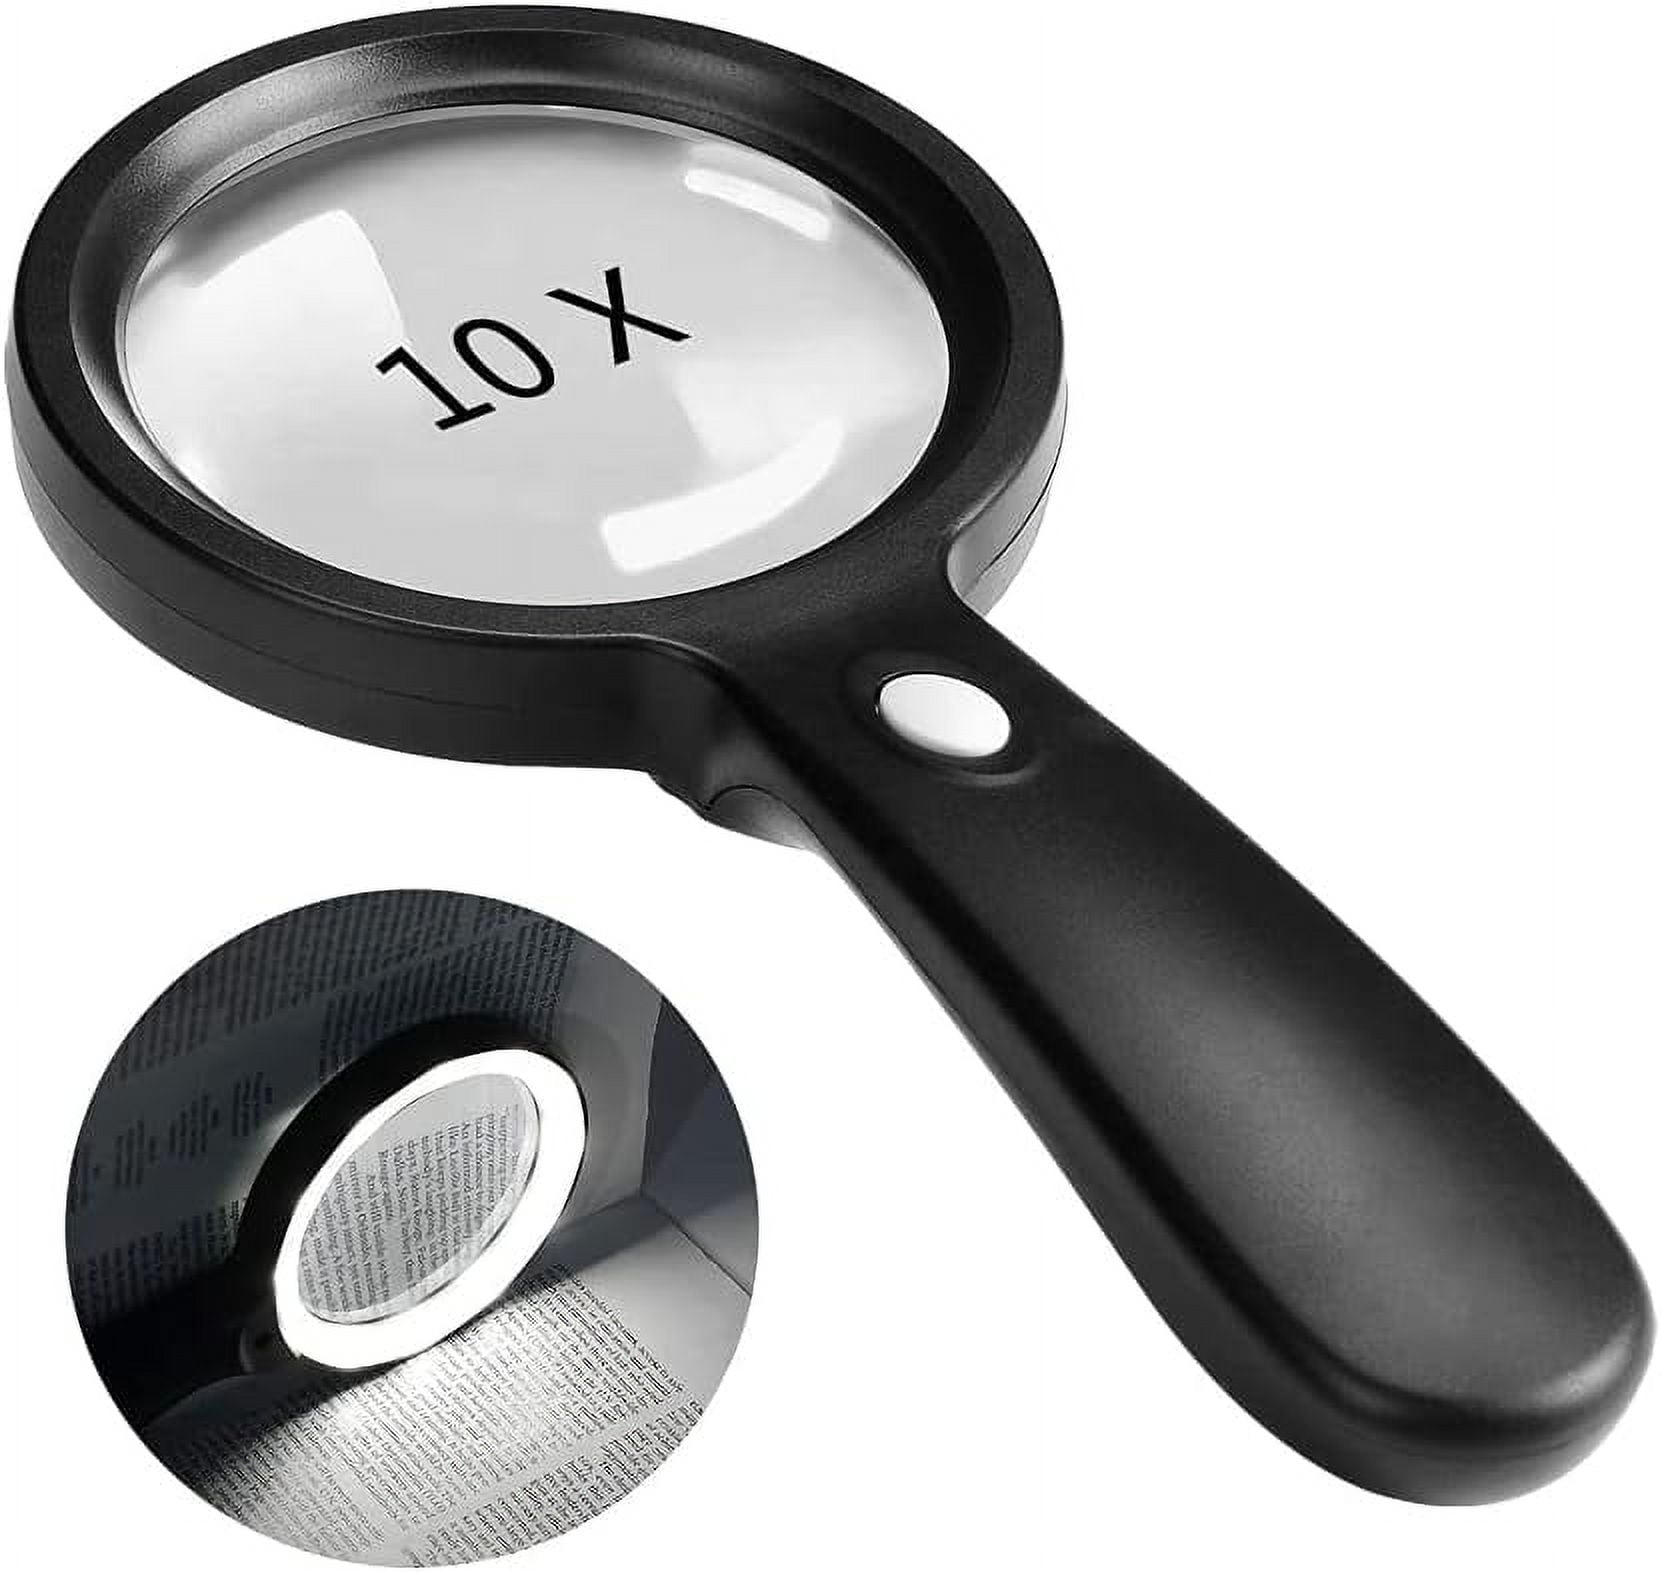 Besufy Head-mounted Magnifier 31 Types Multiple Multi-functional Lens Loupe  Magnifying Glass with LED Light Reading Tool 